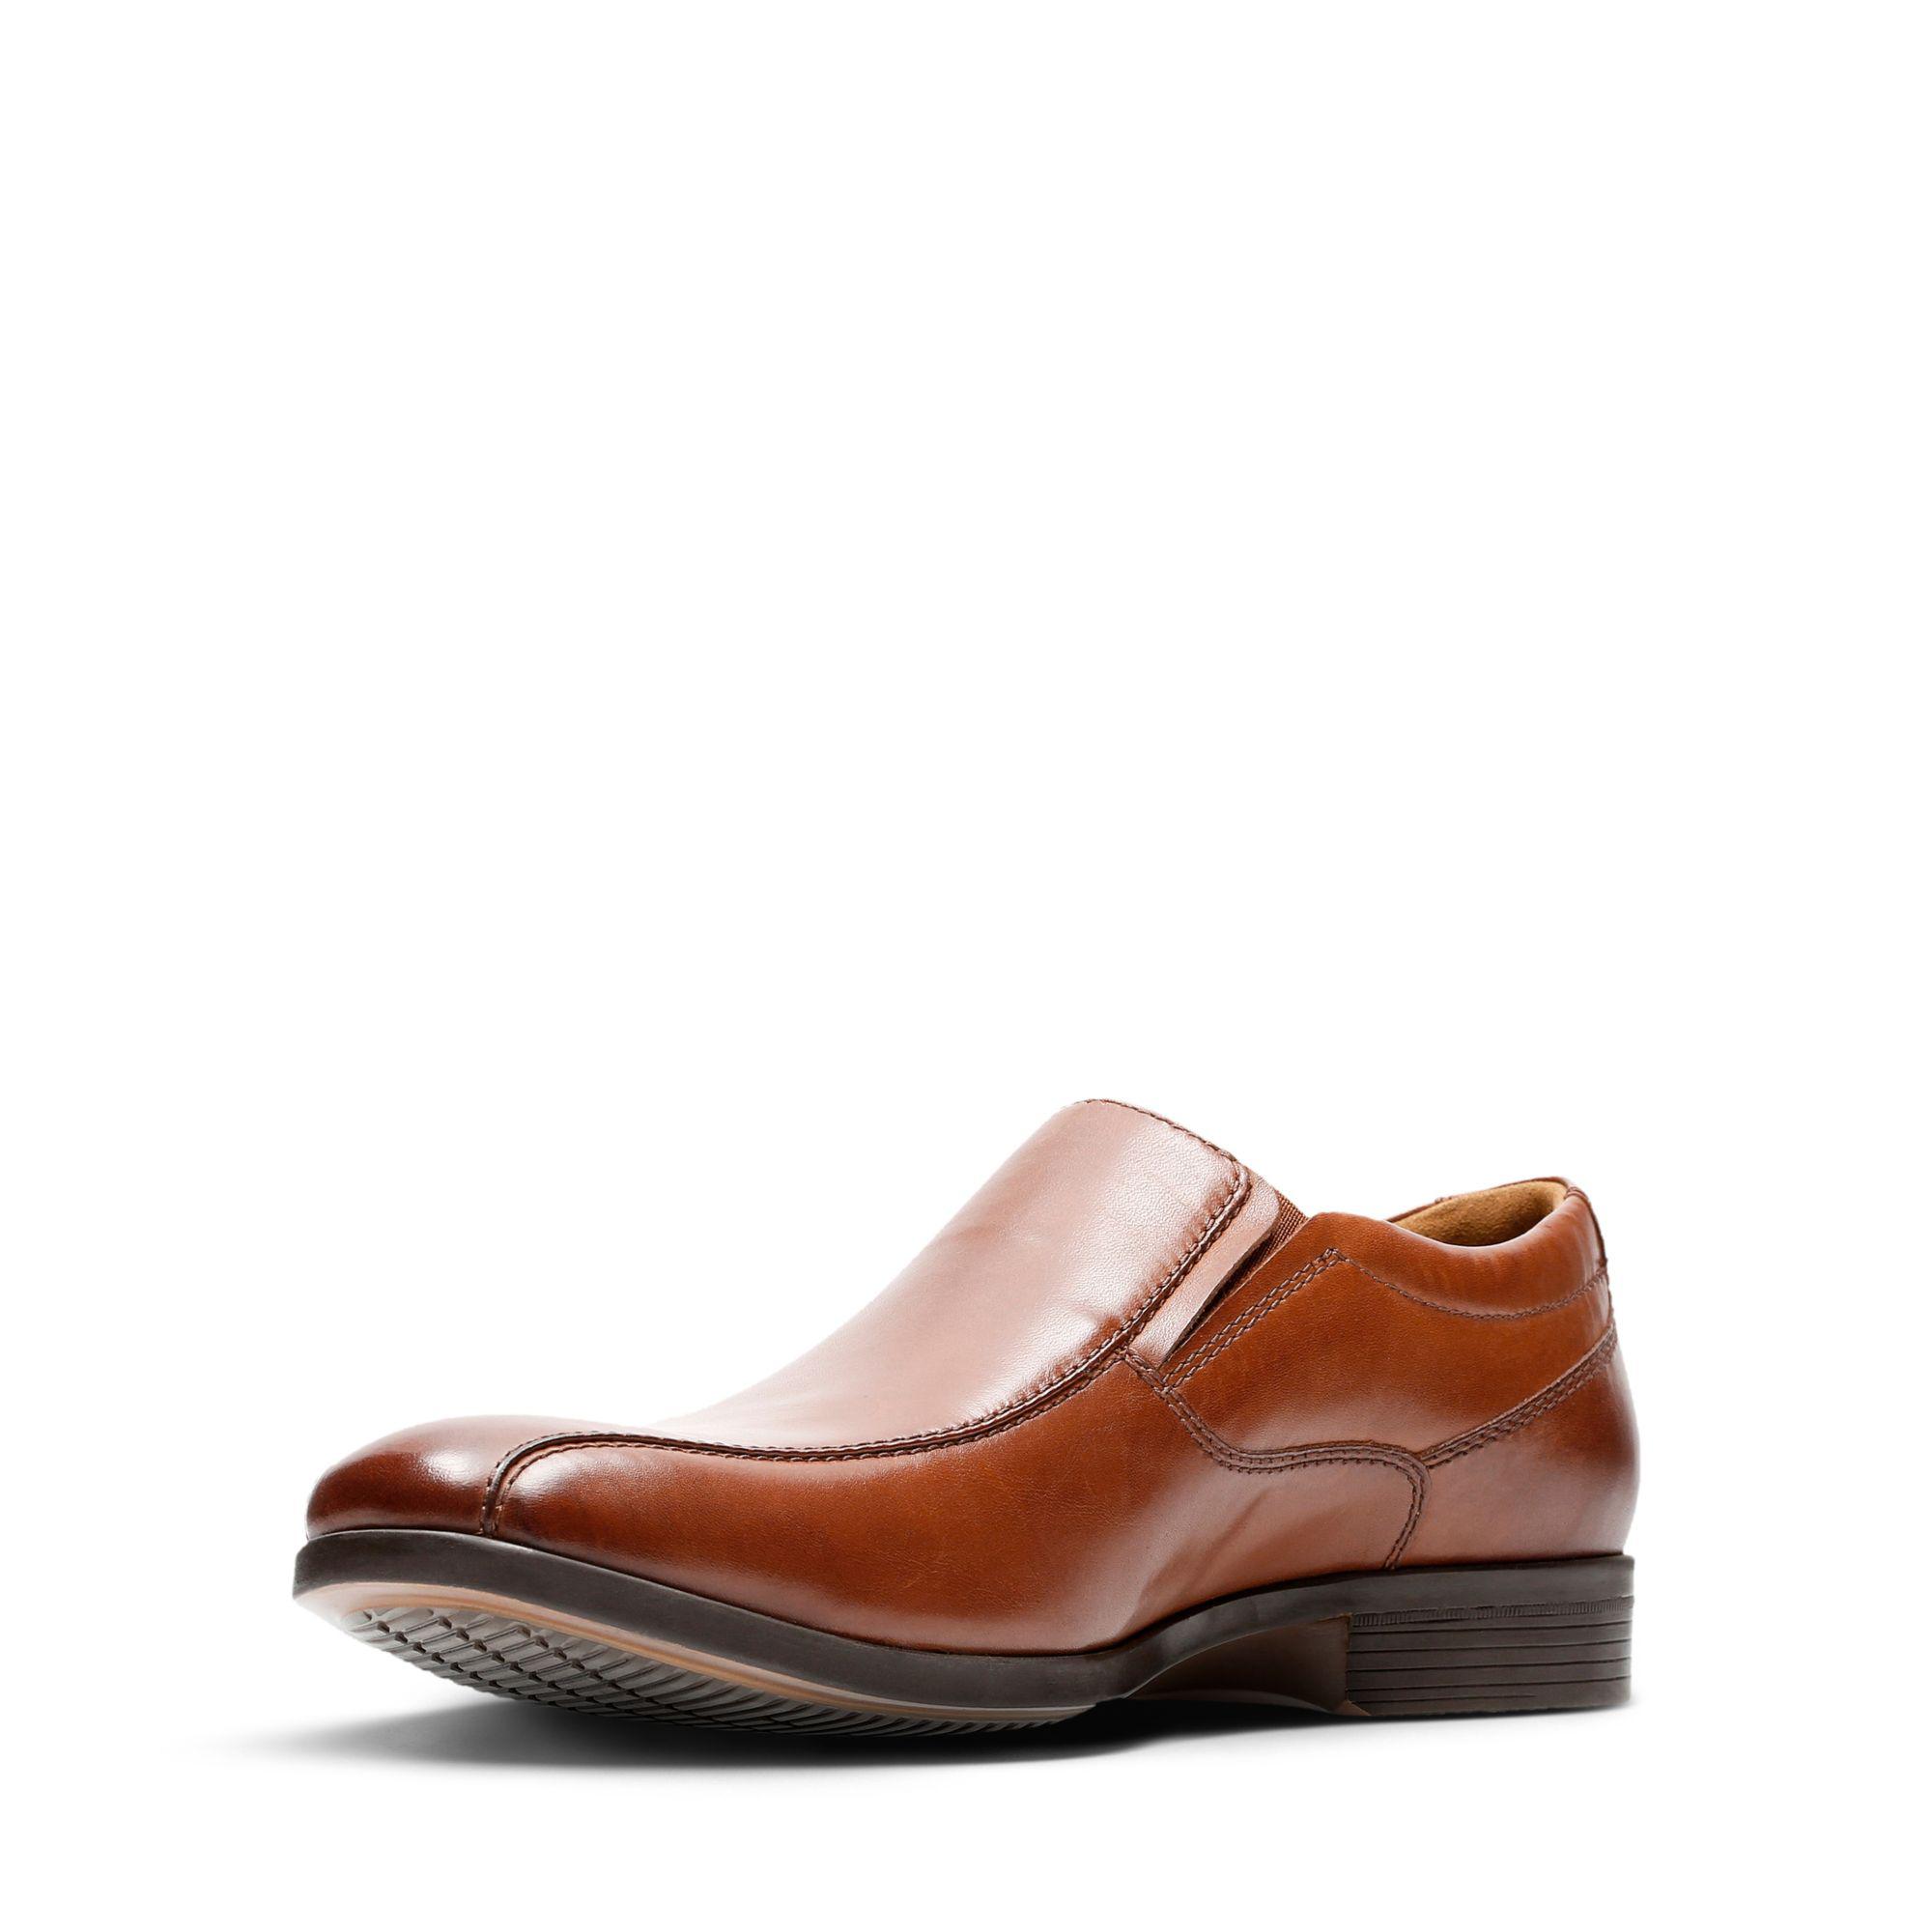 Clarks Conwell Way Sale, SAVE 57%.